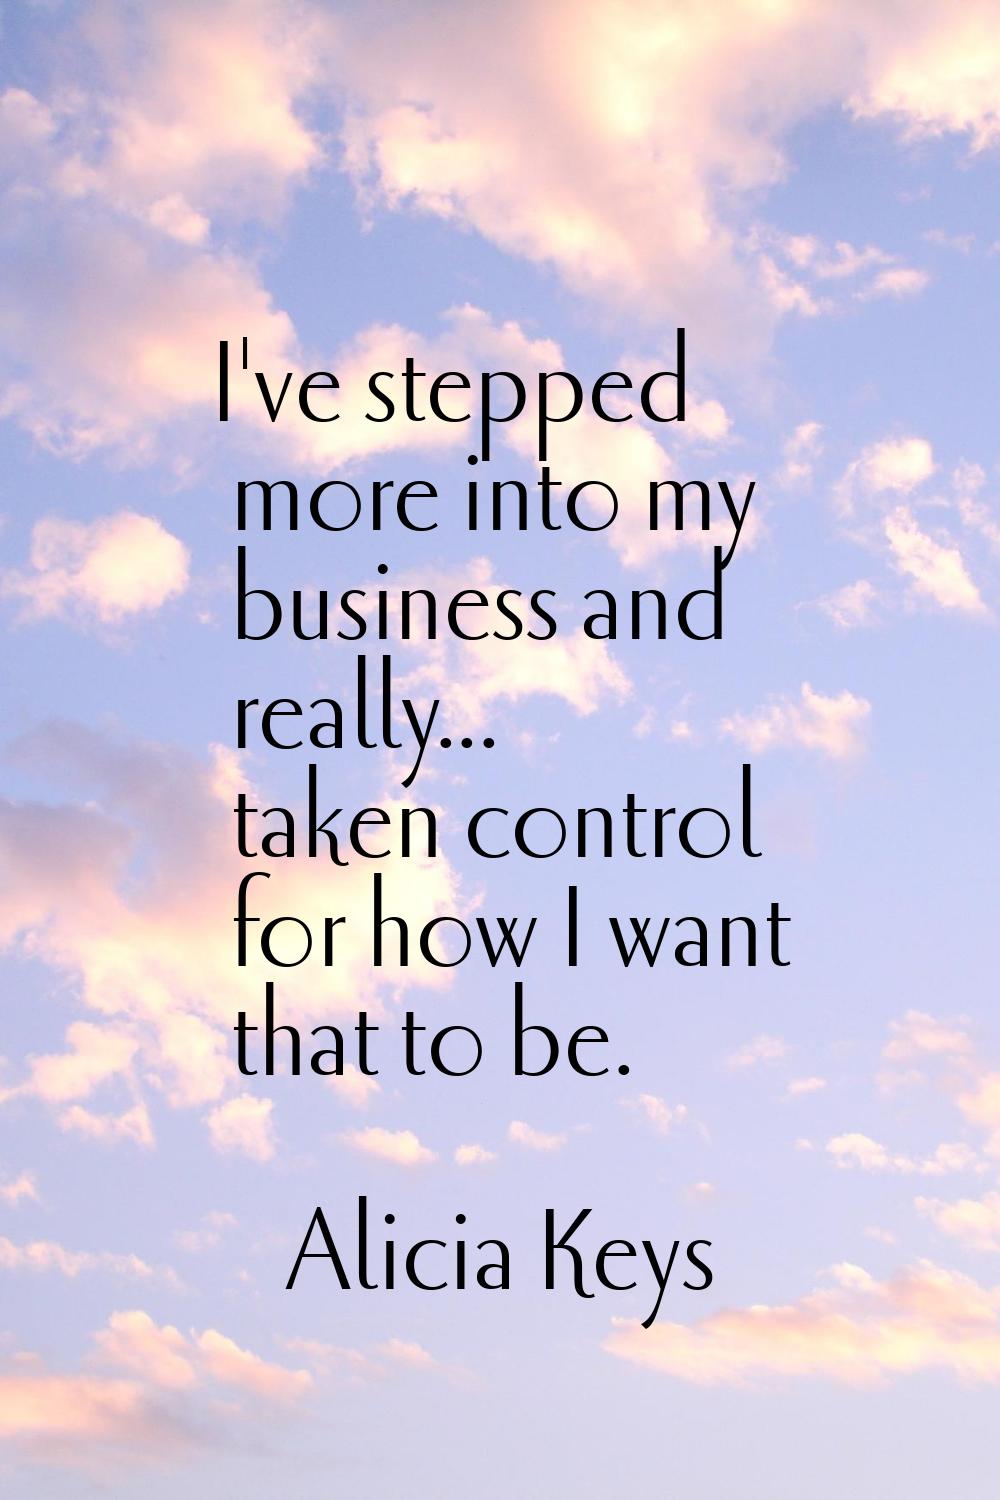 I've stepped more into my business and really... taken control for how I want that to be.